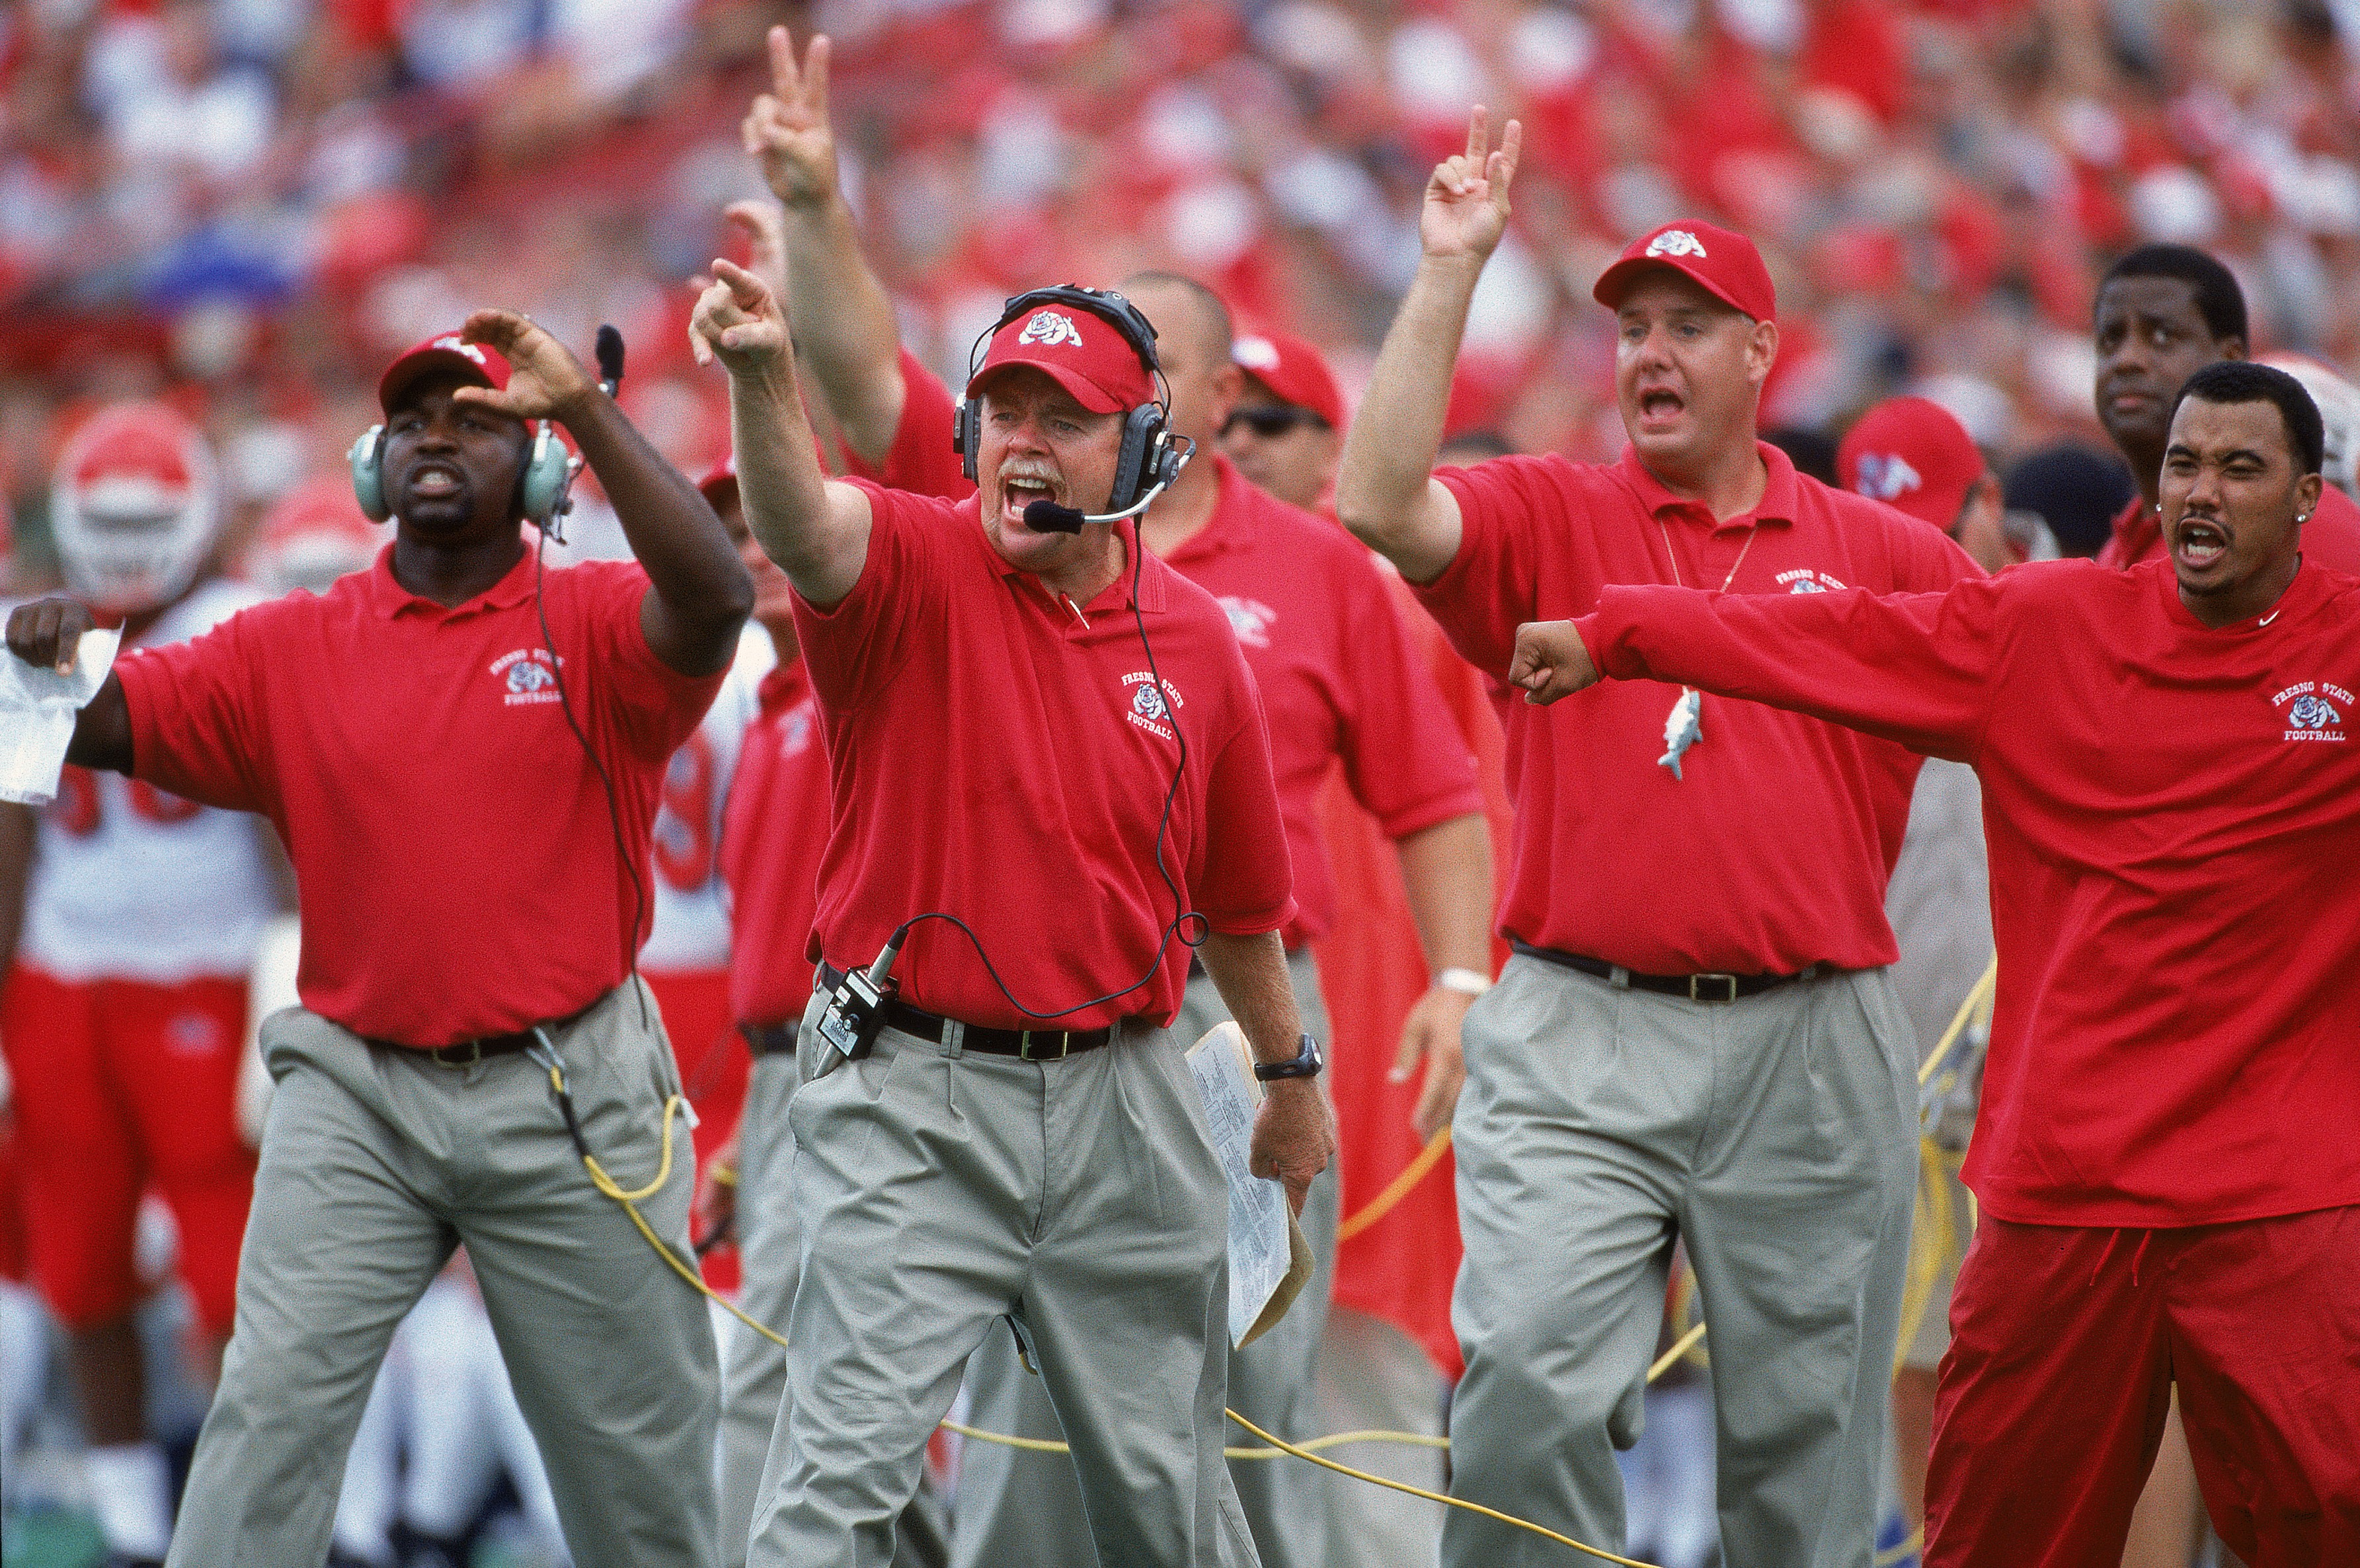 8 Sep 2001:  Head Coach Pat Hill of the Fresno State Bull Dogs yells from the sidelines during the game against the Wisconsin Badgers at Camp Randall Stadium in Madison, Wisconsin. The Bull Dogs defeated the Badgers 32-20.Mandatory Credit: Jonathan Daniel